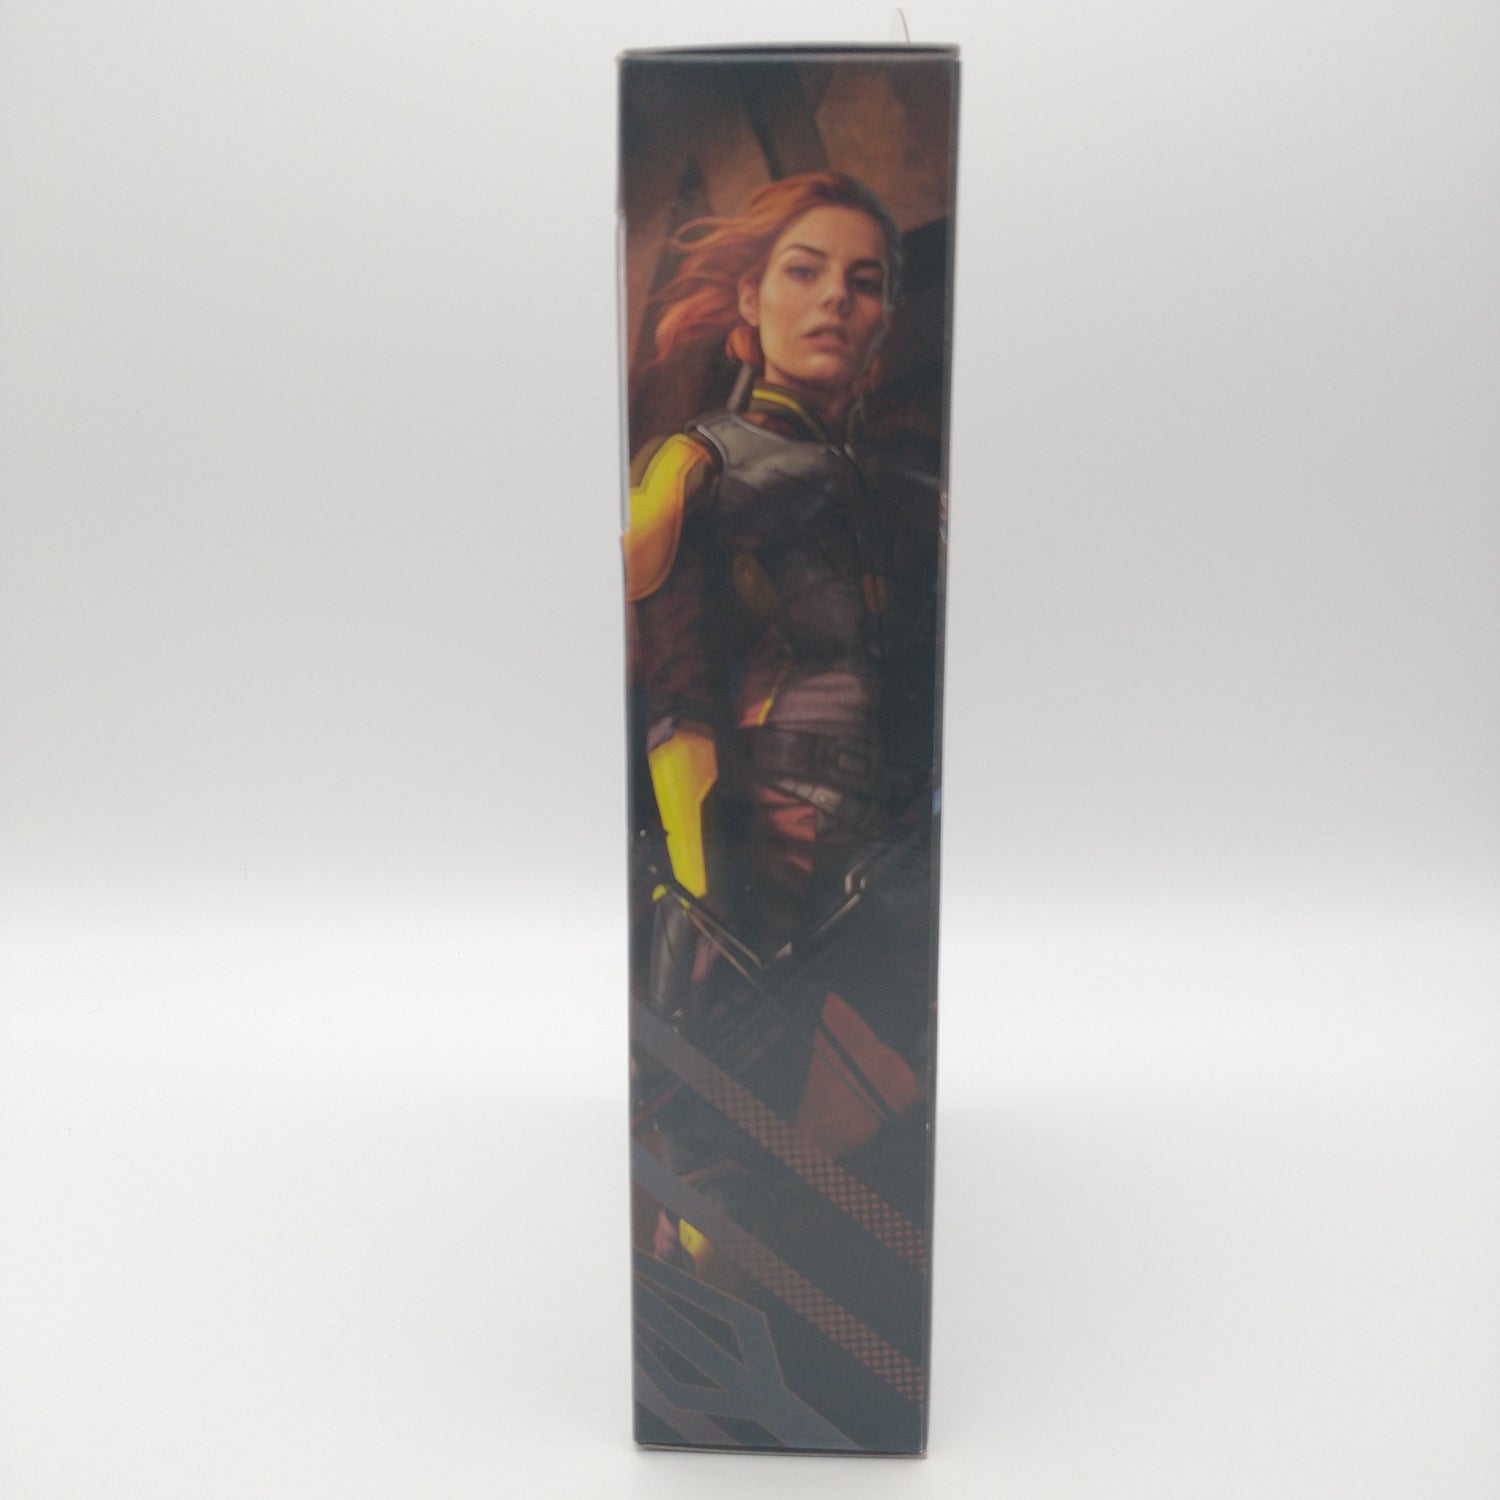 The side of the box features a picture of scarlett